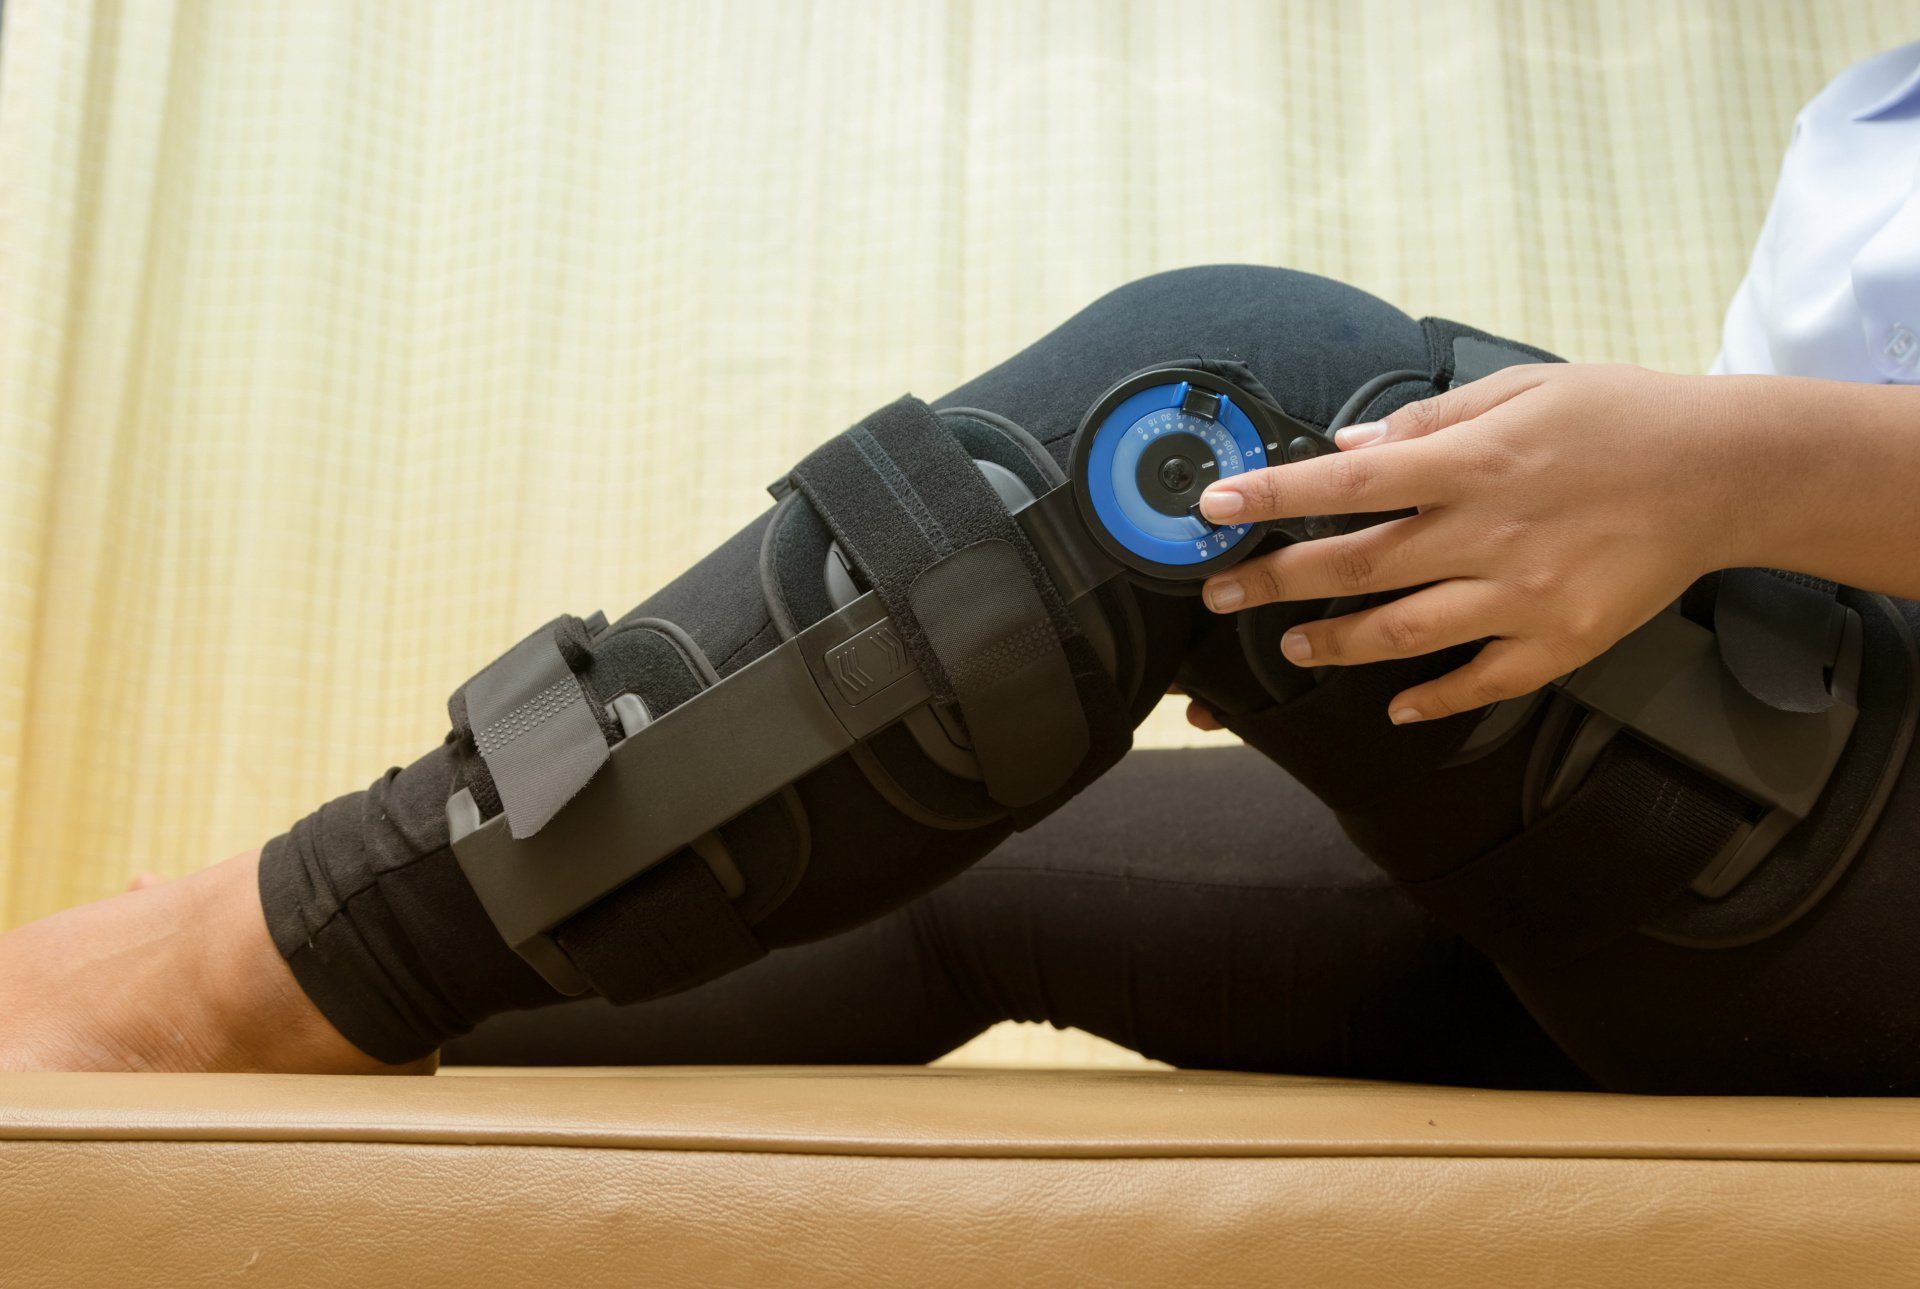 How to Know if You Tore Your ACL